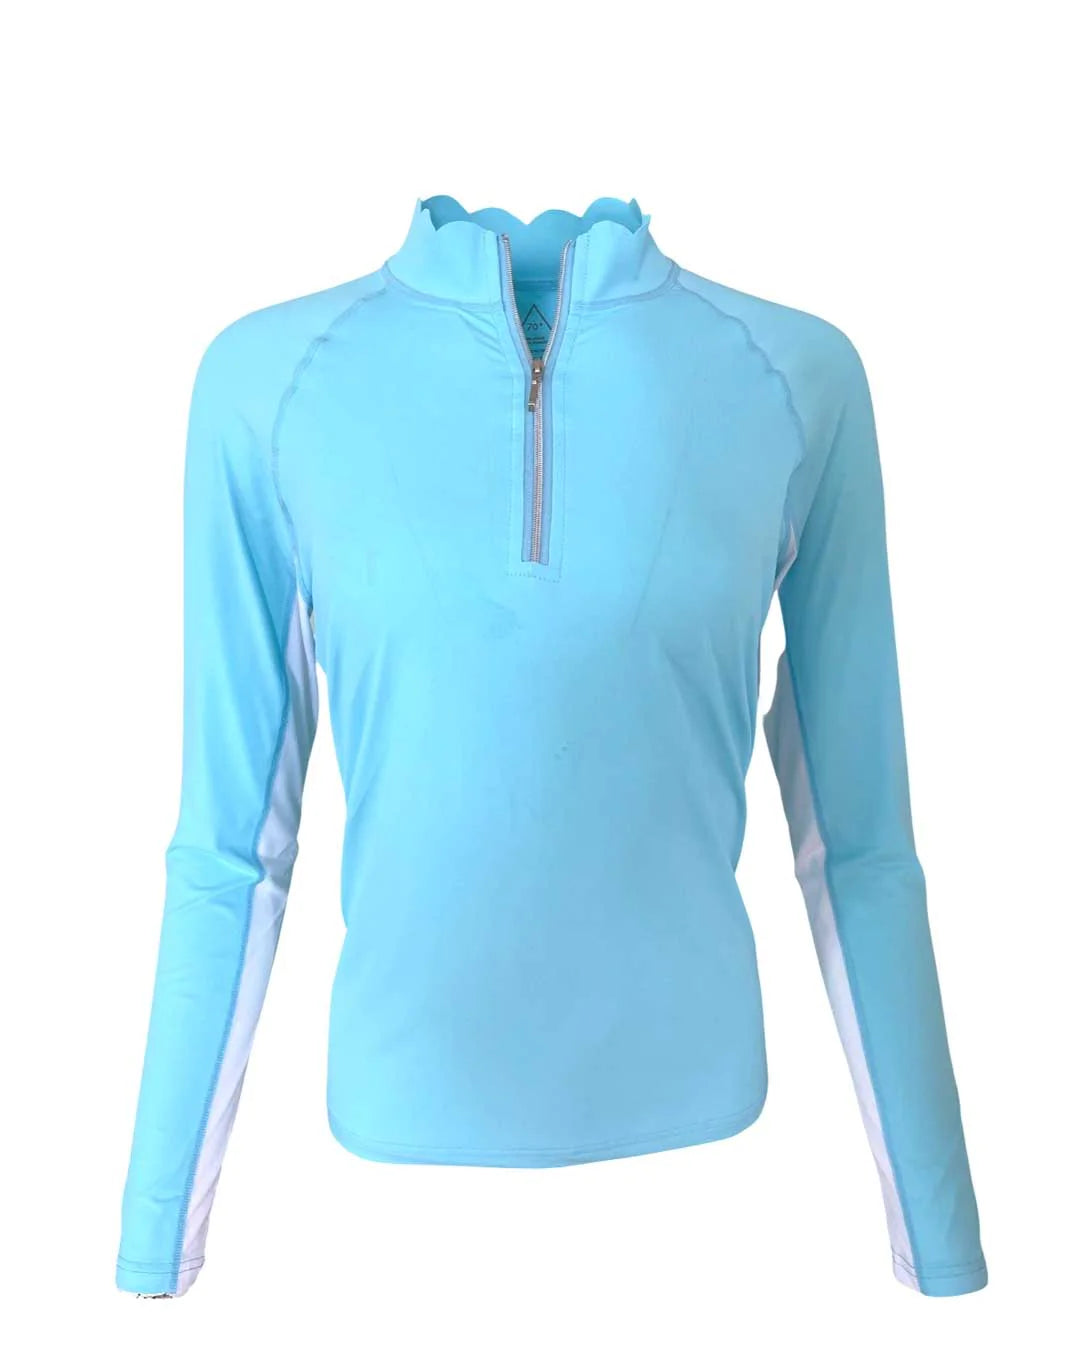 Degree 70  Ladies Scalloped Sun Shirt. Available in 3 colors